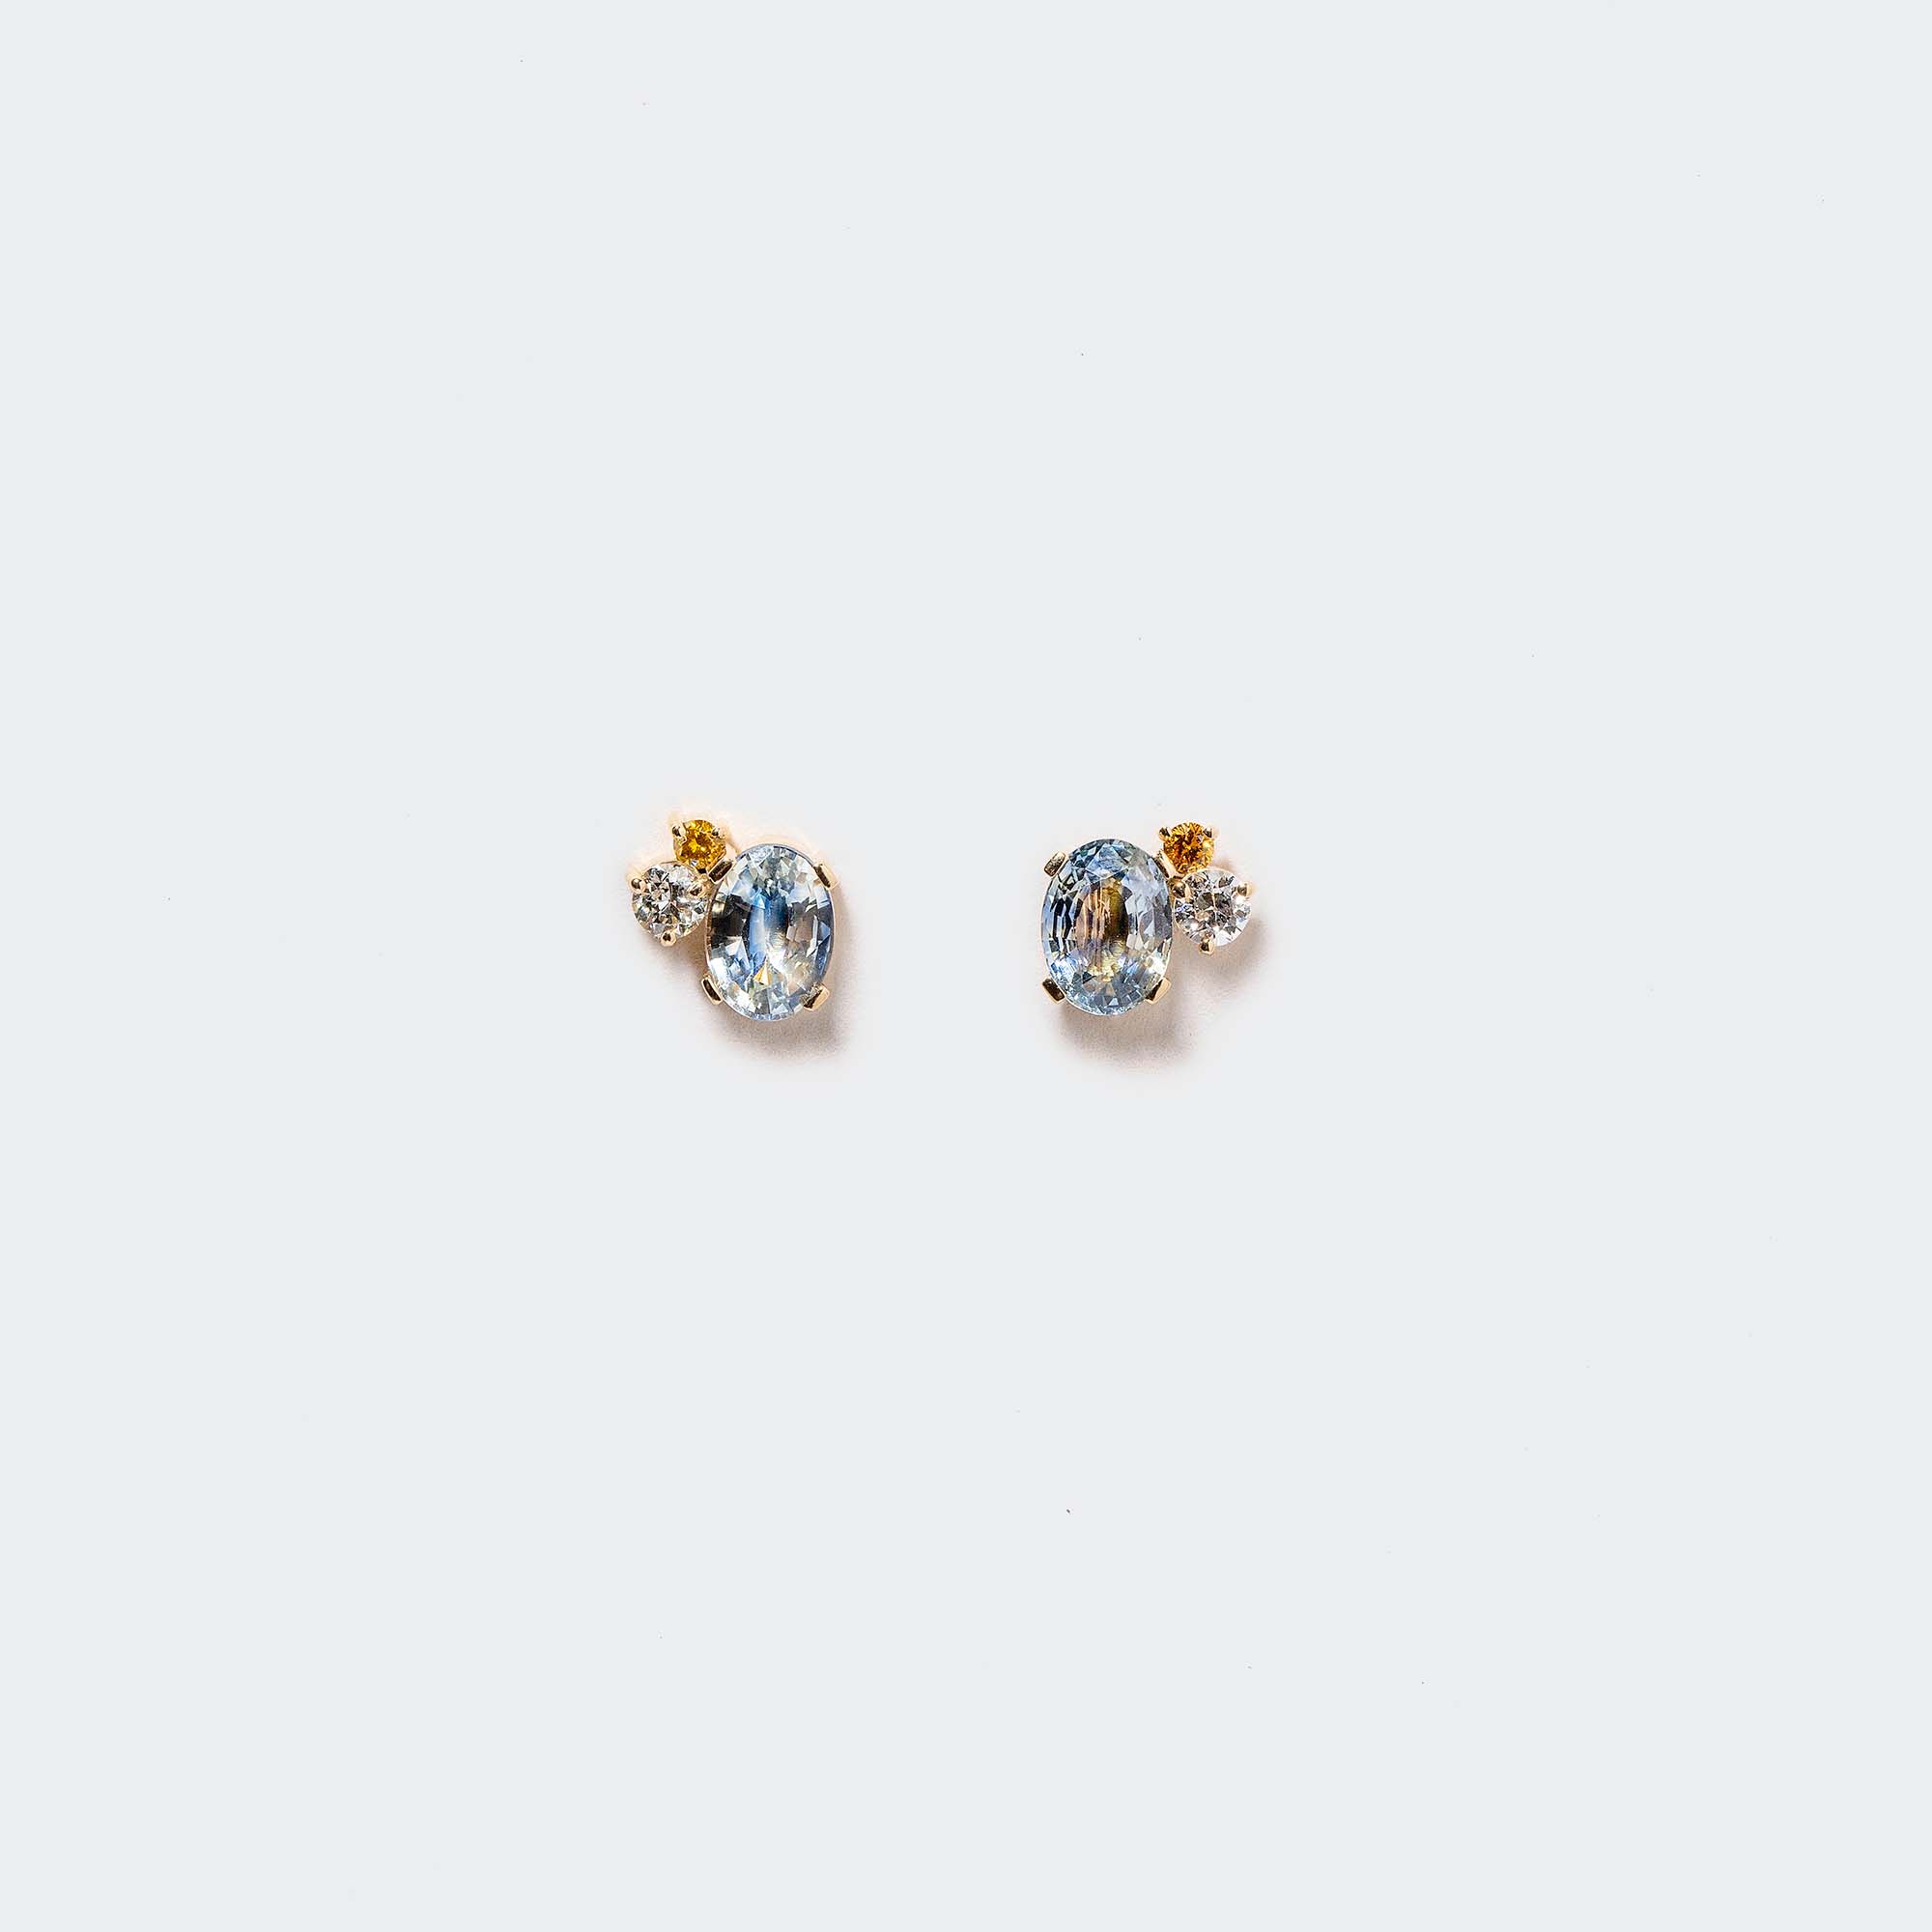 product_details:: Oscillating Earrings on light color background.